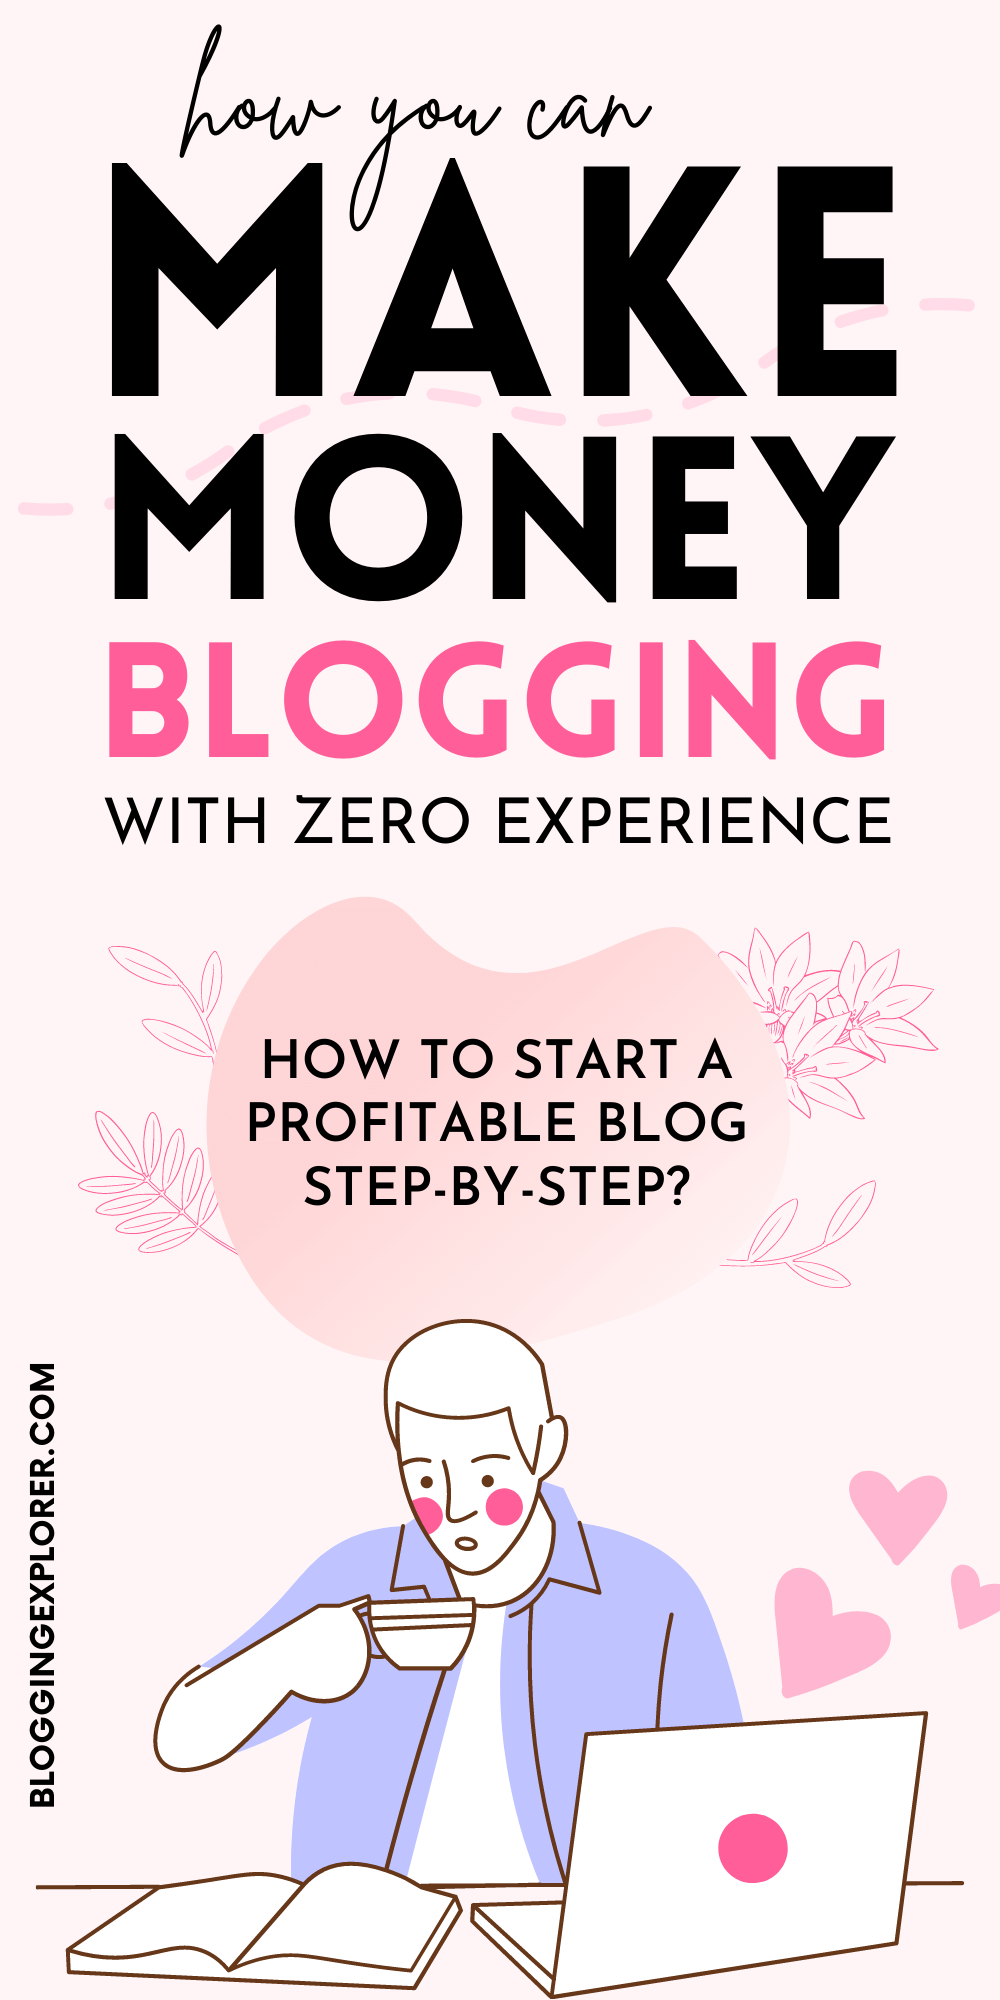 How to make money blogging for beginners with zero experience